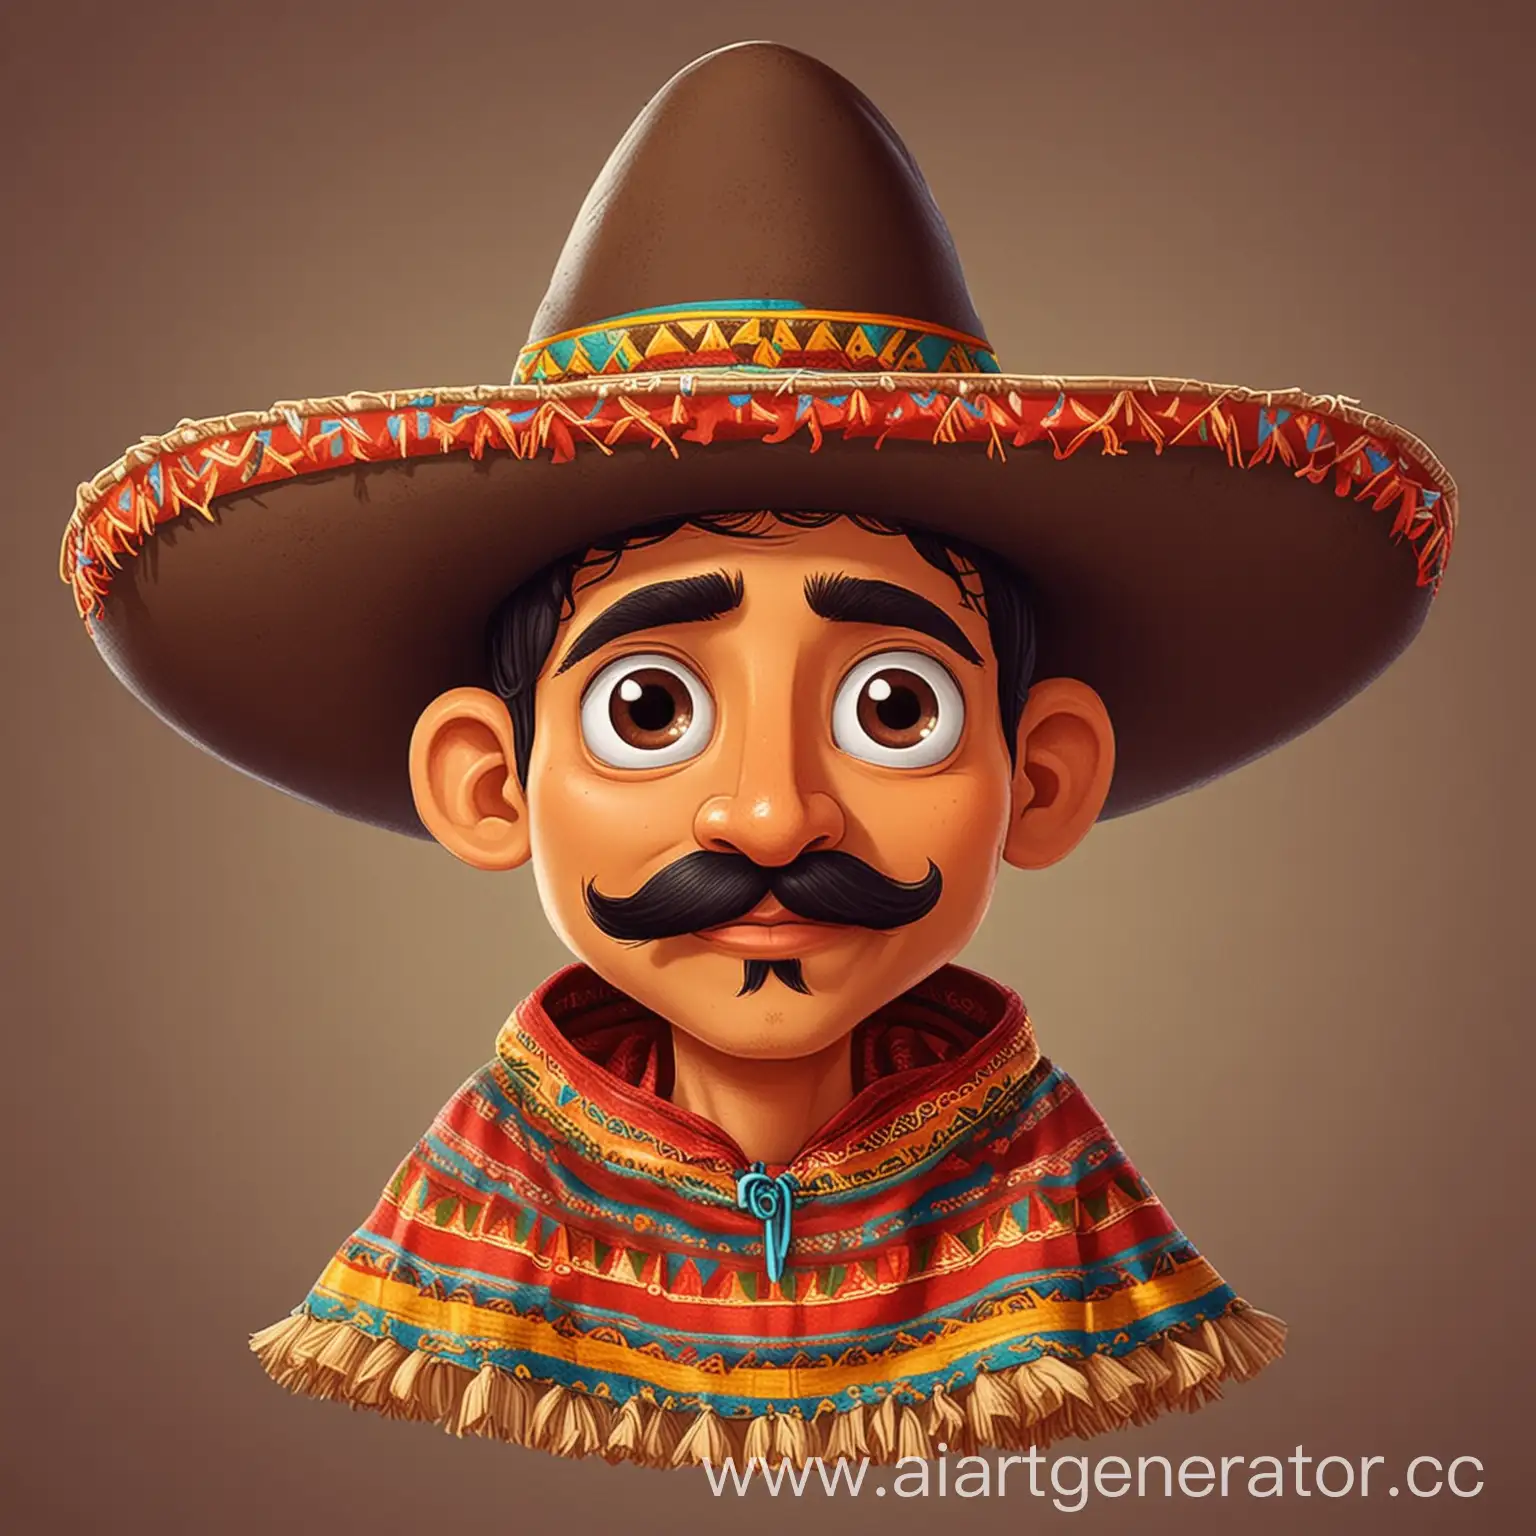 Cartoon mexican guy with moustaches, poncho and a hat